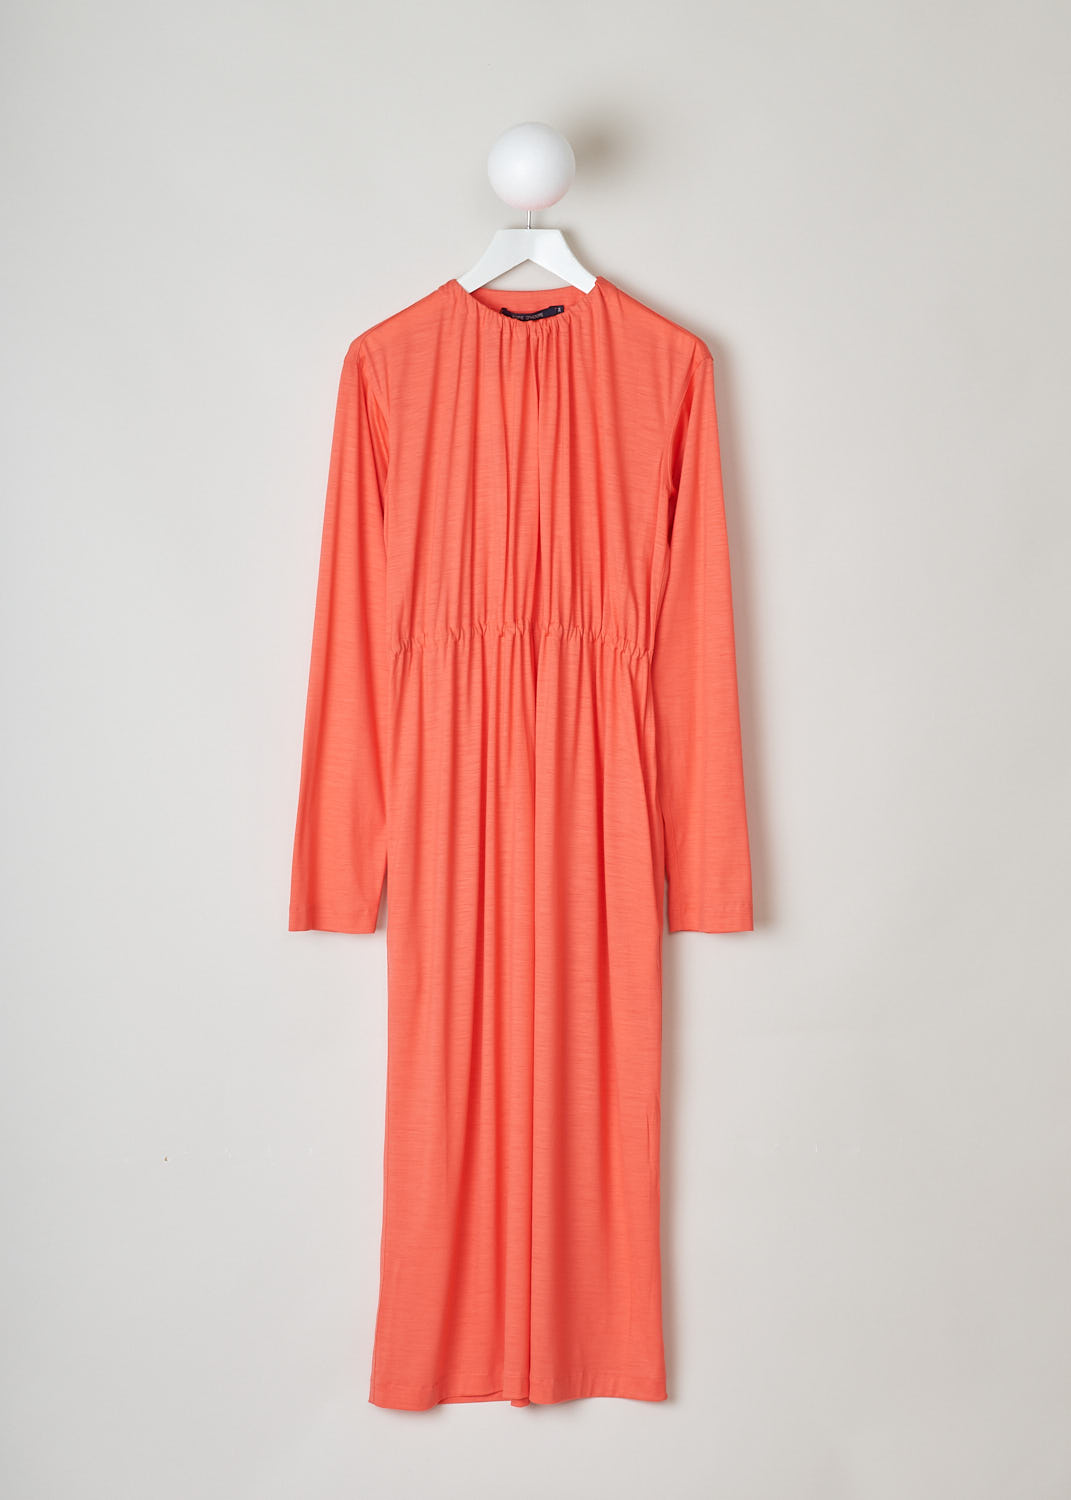 SOFIE Dâ€™HOORE, LONG SLEEVE CORAL DRESS, DARA_WOJE_CORAL, Pink, Orange, Front, This coral colored maxi dress features a gathered elasticated neckline. The waist is also elasticated, cinching in the waist. Slant pockets can be found concealed in the seam.
